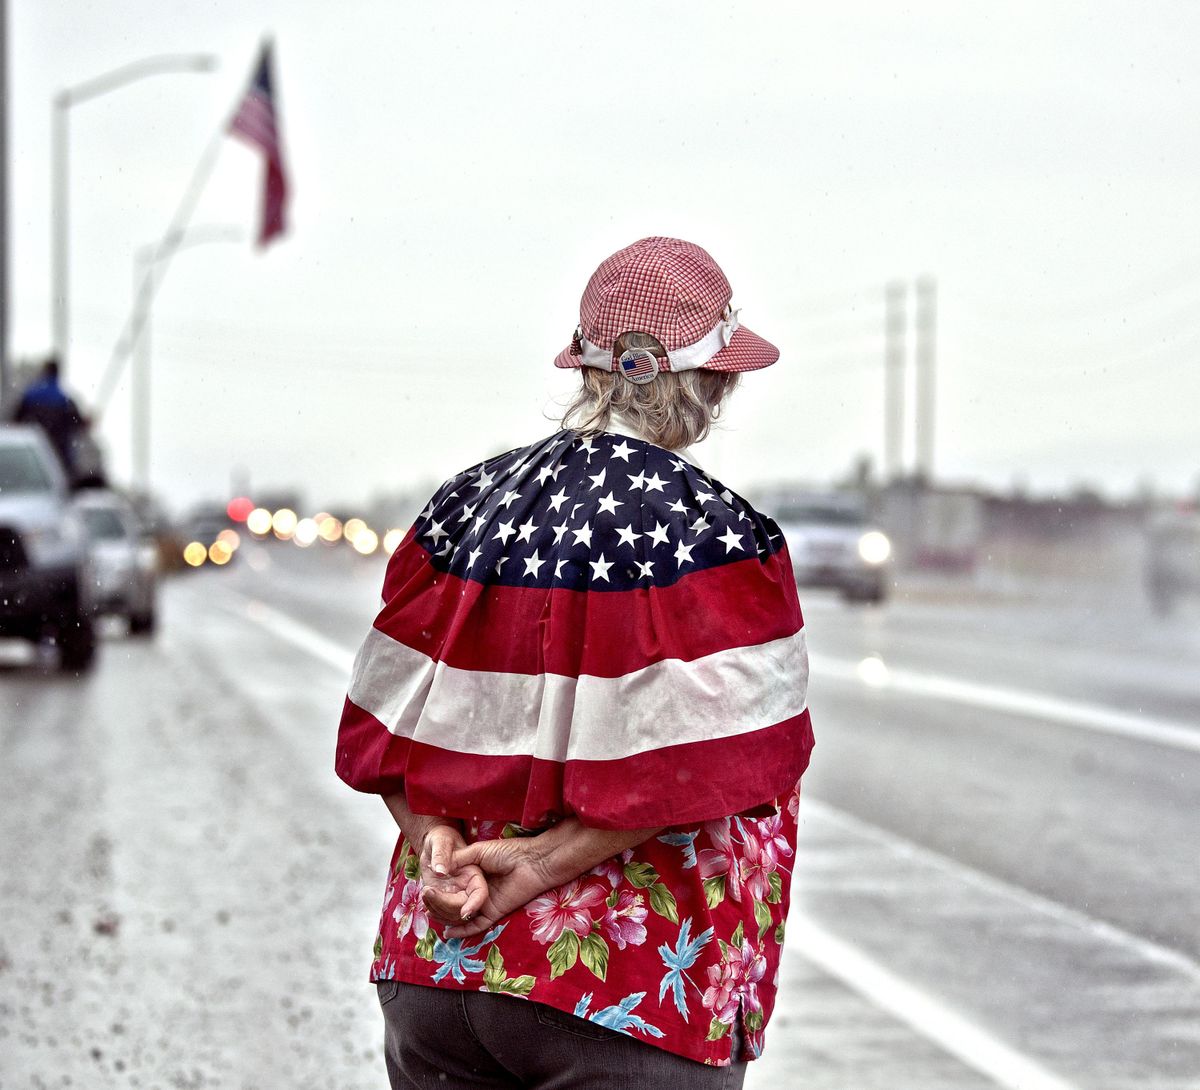 "A little rain is nothing compared to what he went through," said Glenda Boerner of Rathdrum, during the welcome home escort for Army Sgt. 1st Class Brian Sharp in Hayden, Id. on Friday, Aug. 30, 2019. Brian, a Green Beret, was injured in a battle in Afghanistan and later awarded the Purple Heart. (Kathy Plonka / The Spokesman-Review)